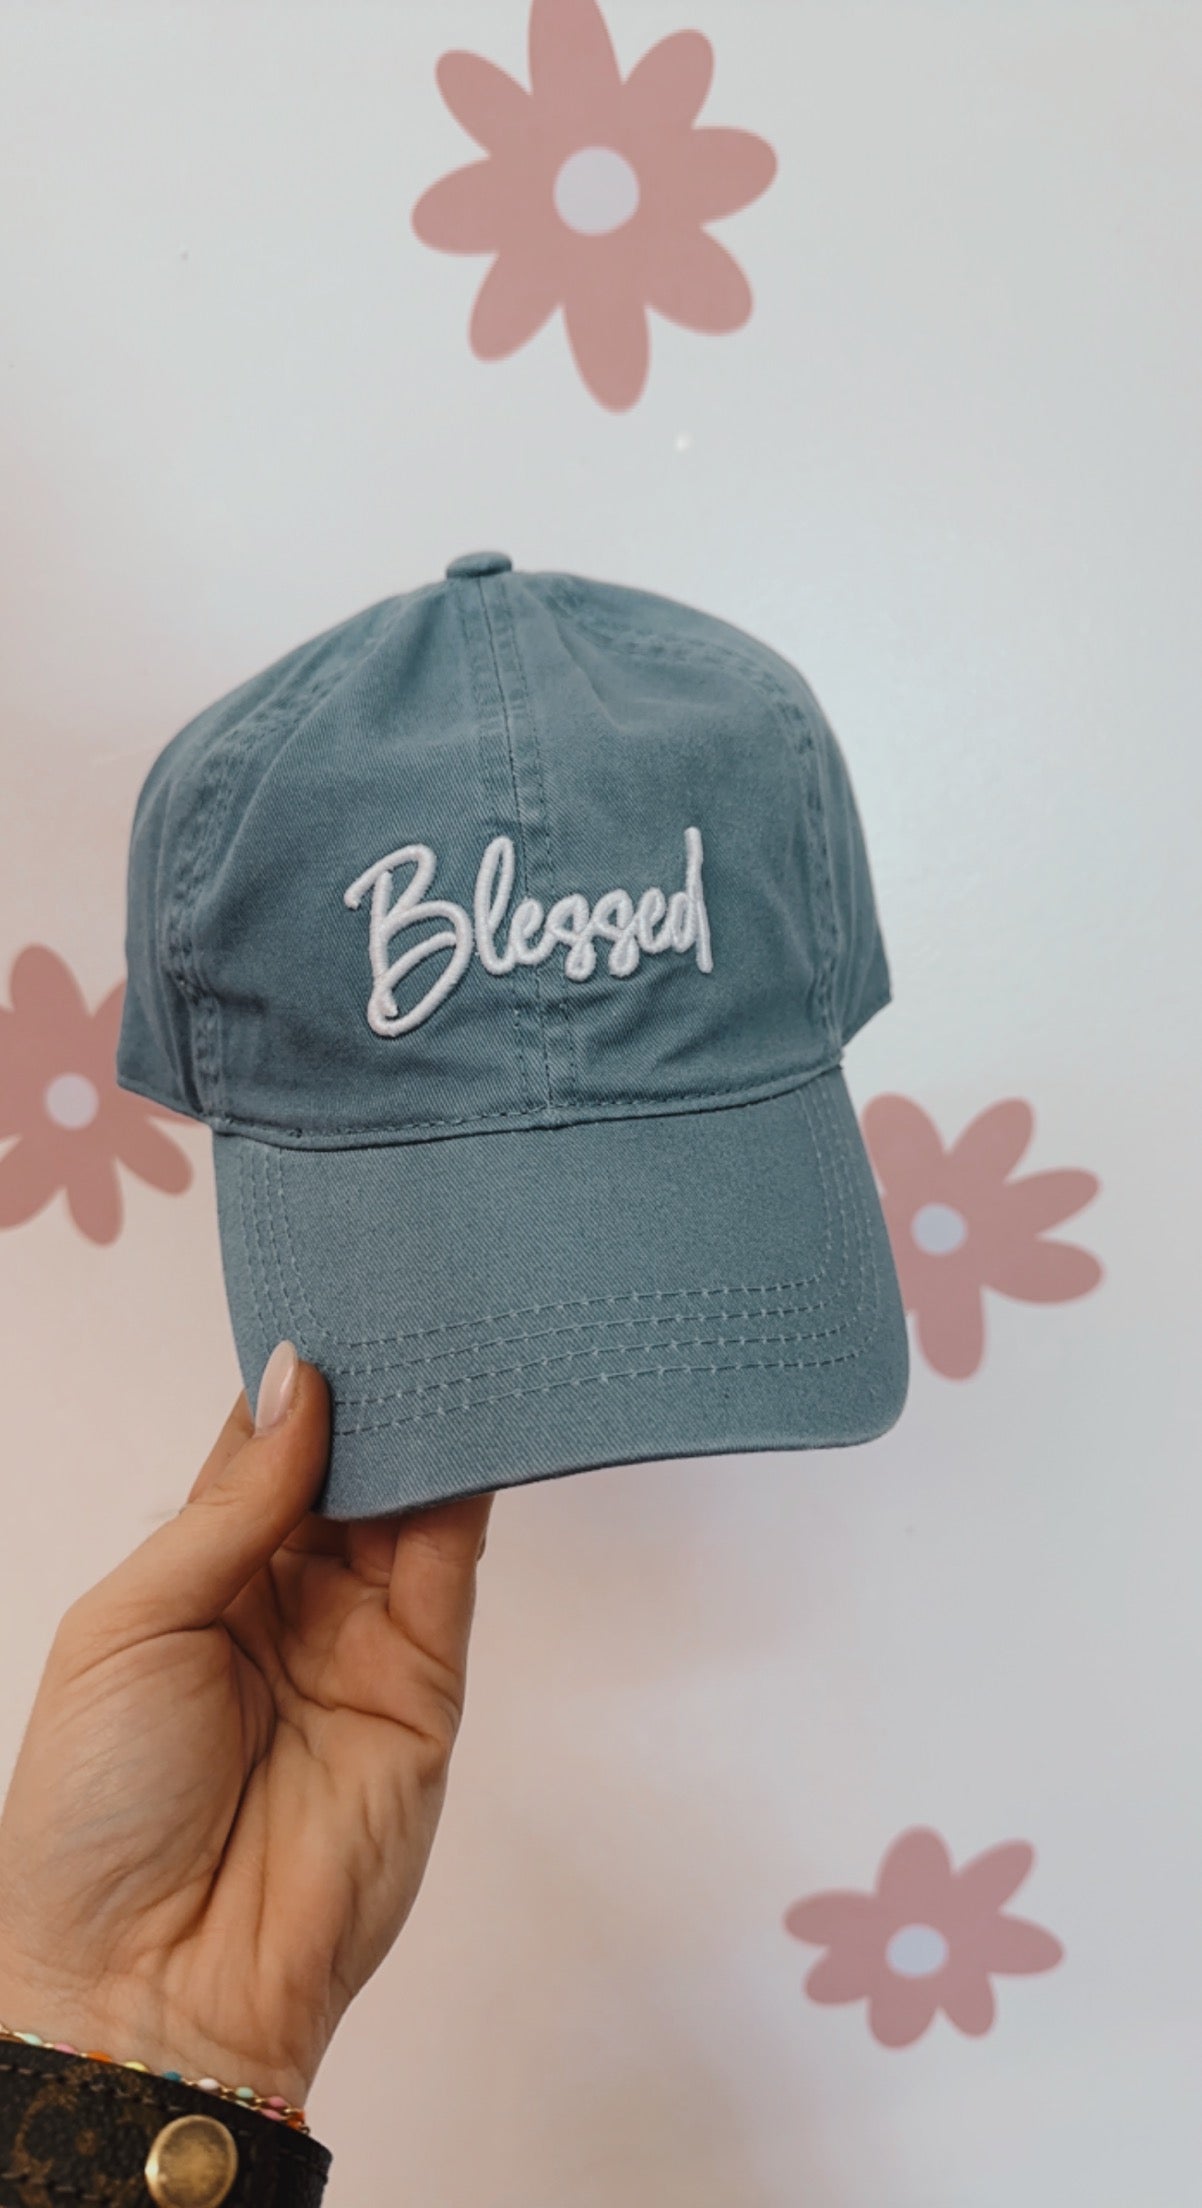 “Blessed” ball cap